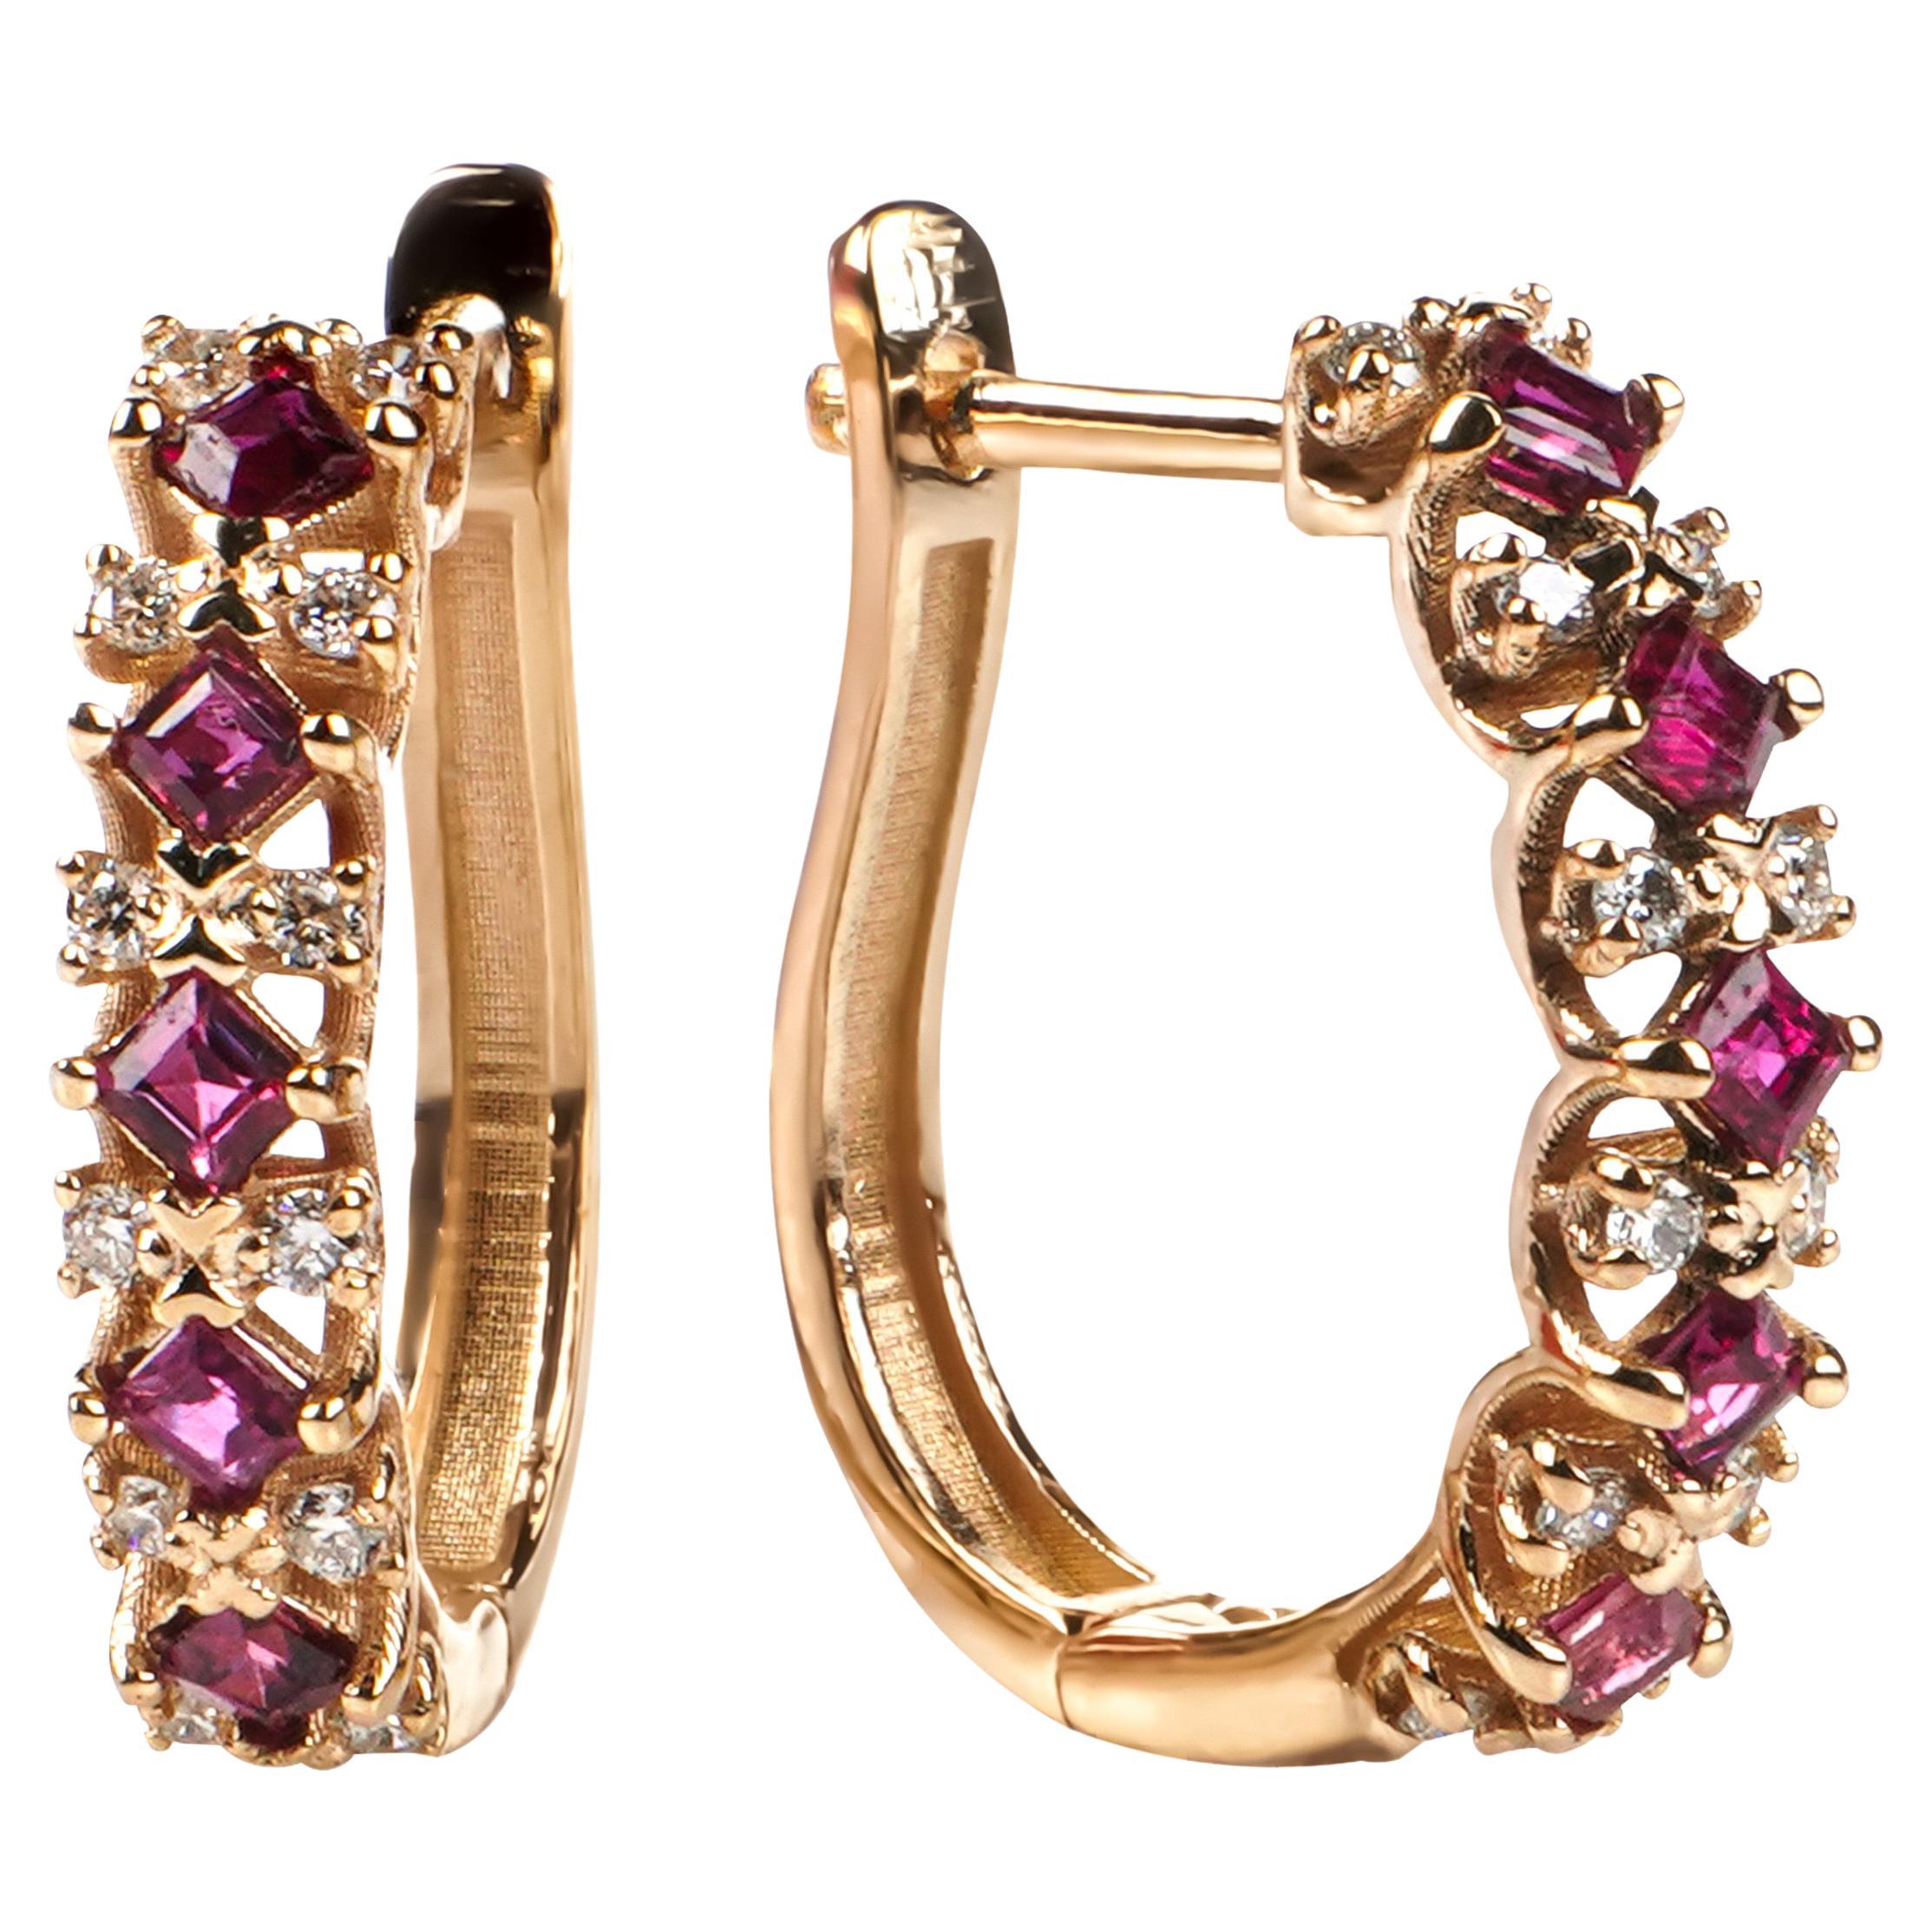 18K solid GOLD Unity Diamond and Ruby earrings